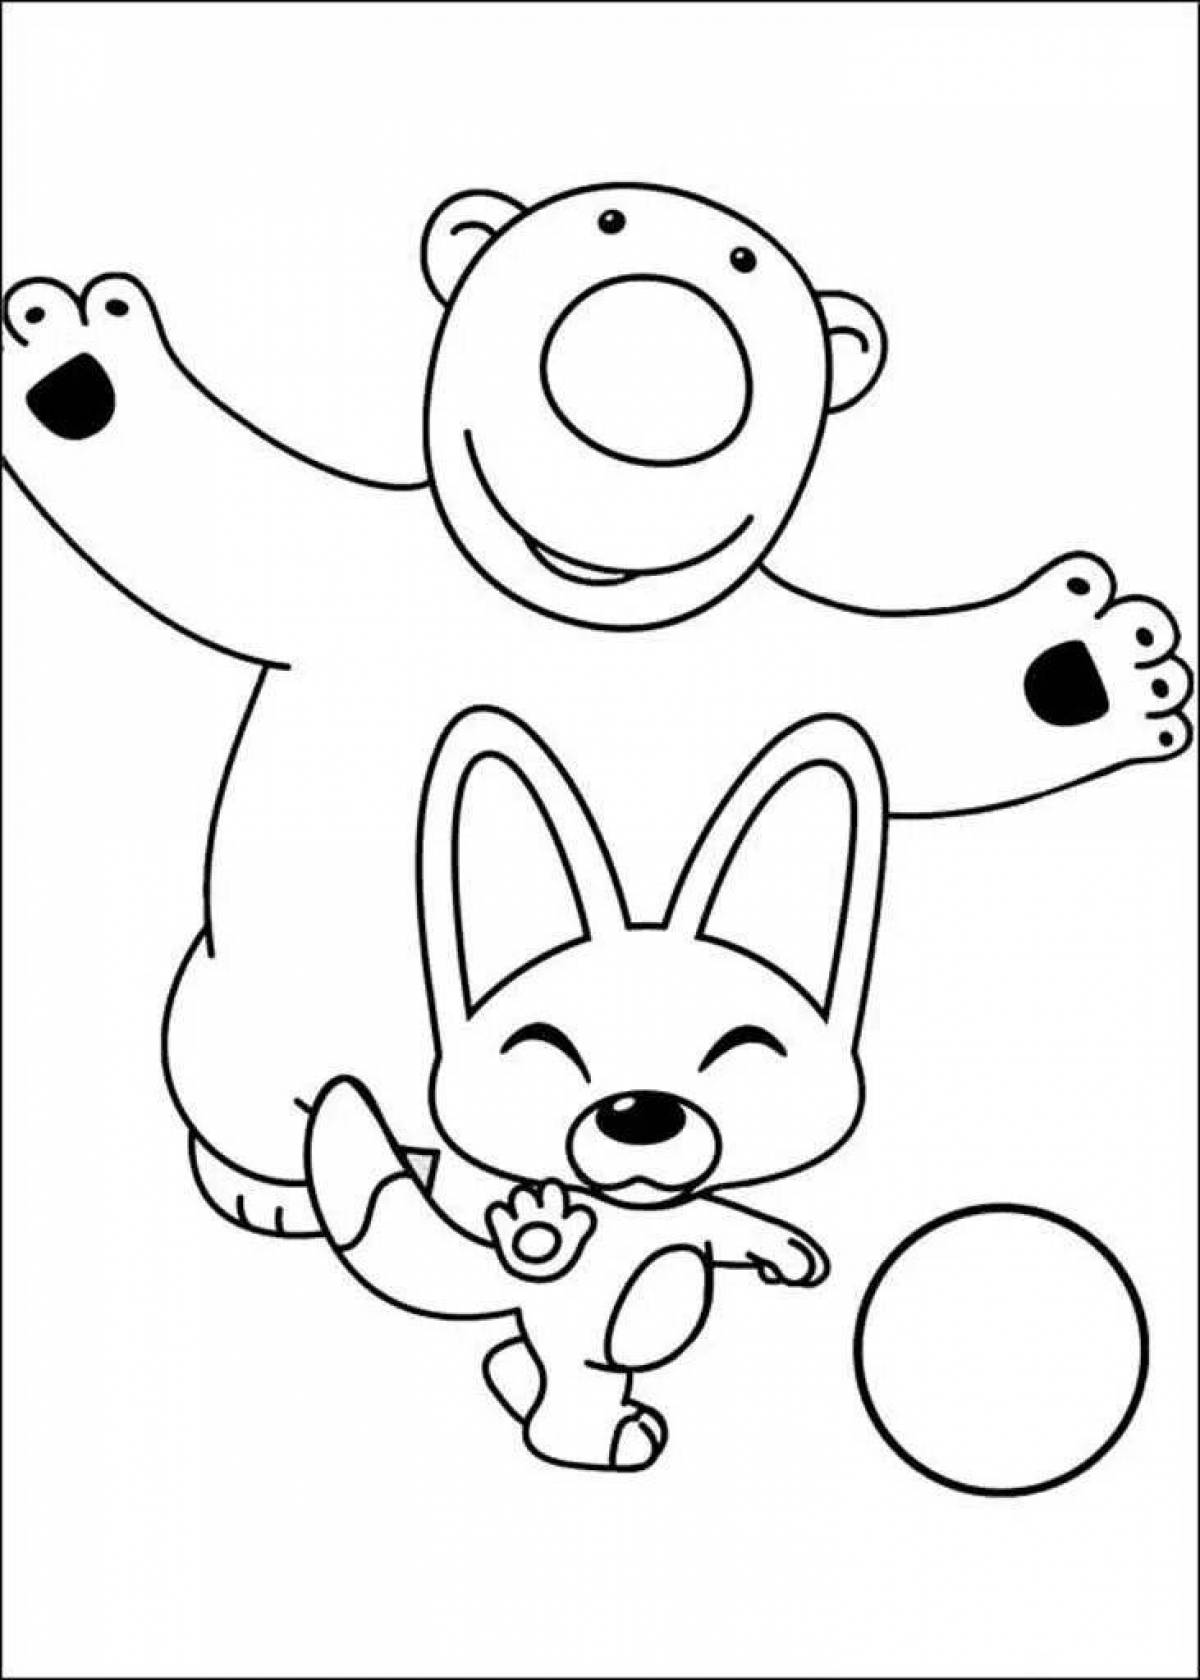 Pororo awesome coloring book